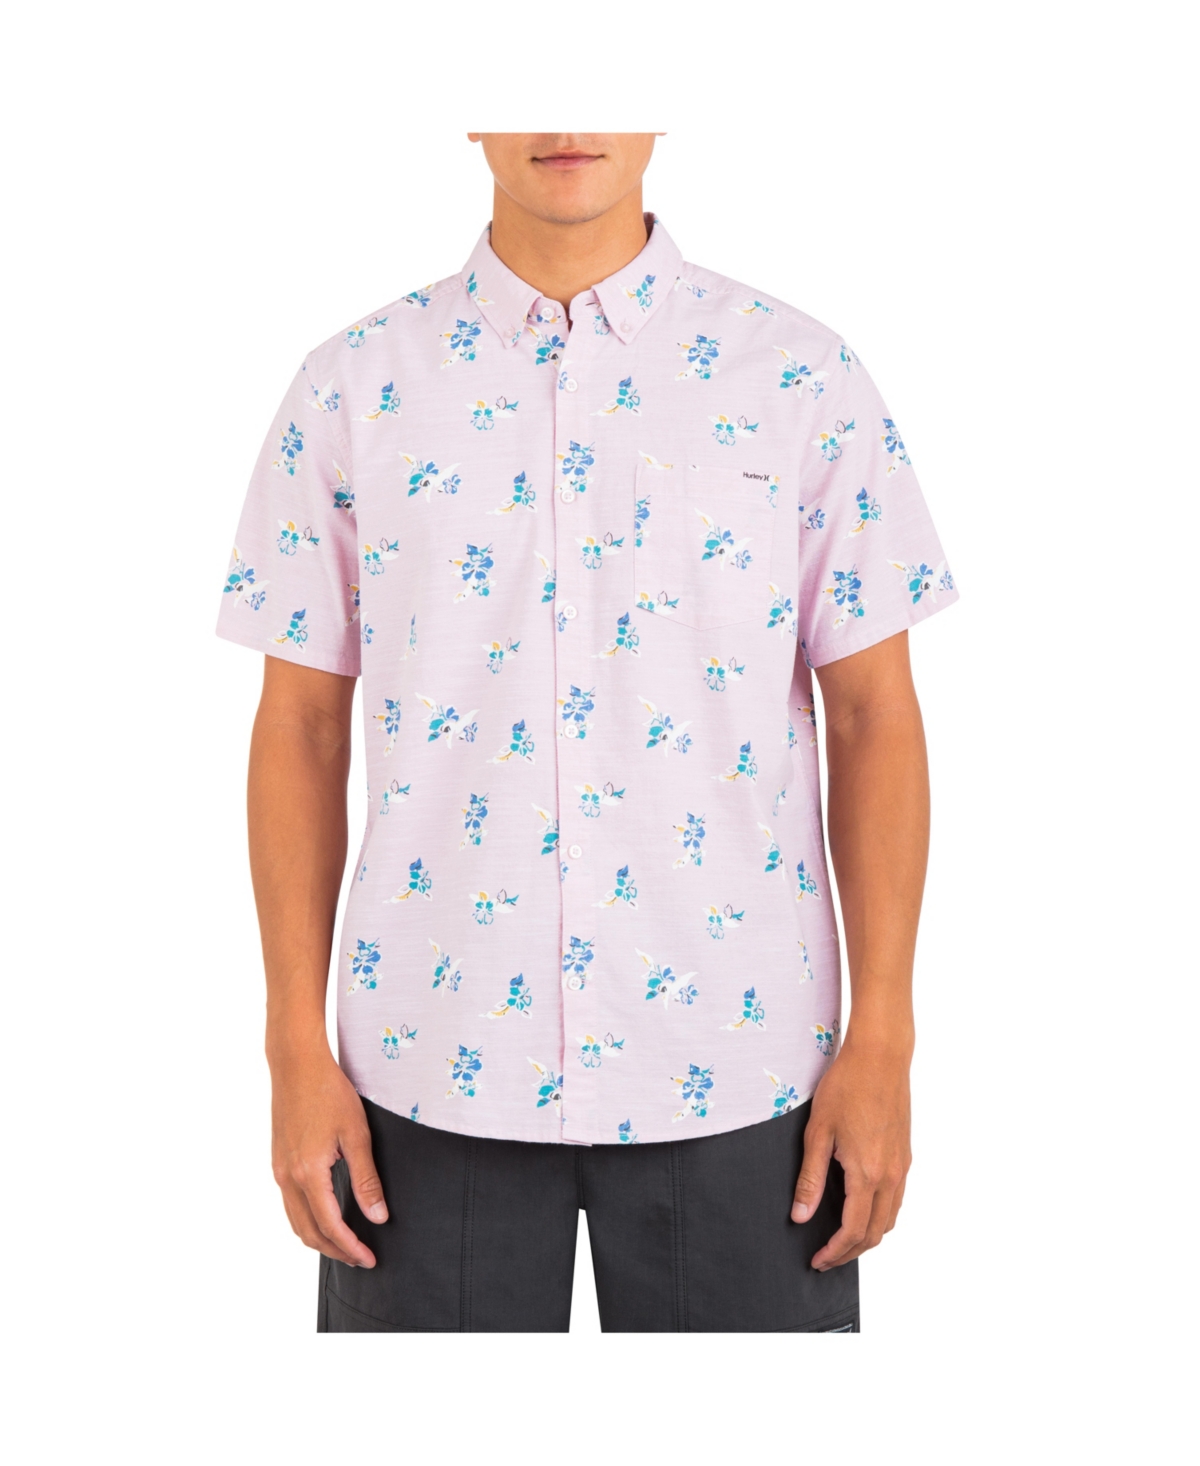 Men's One and Only Stretch Short Sleeve Shirt - Nectarine